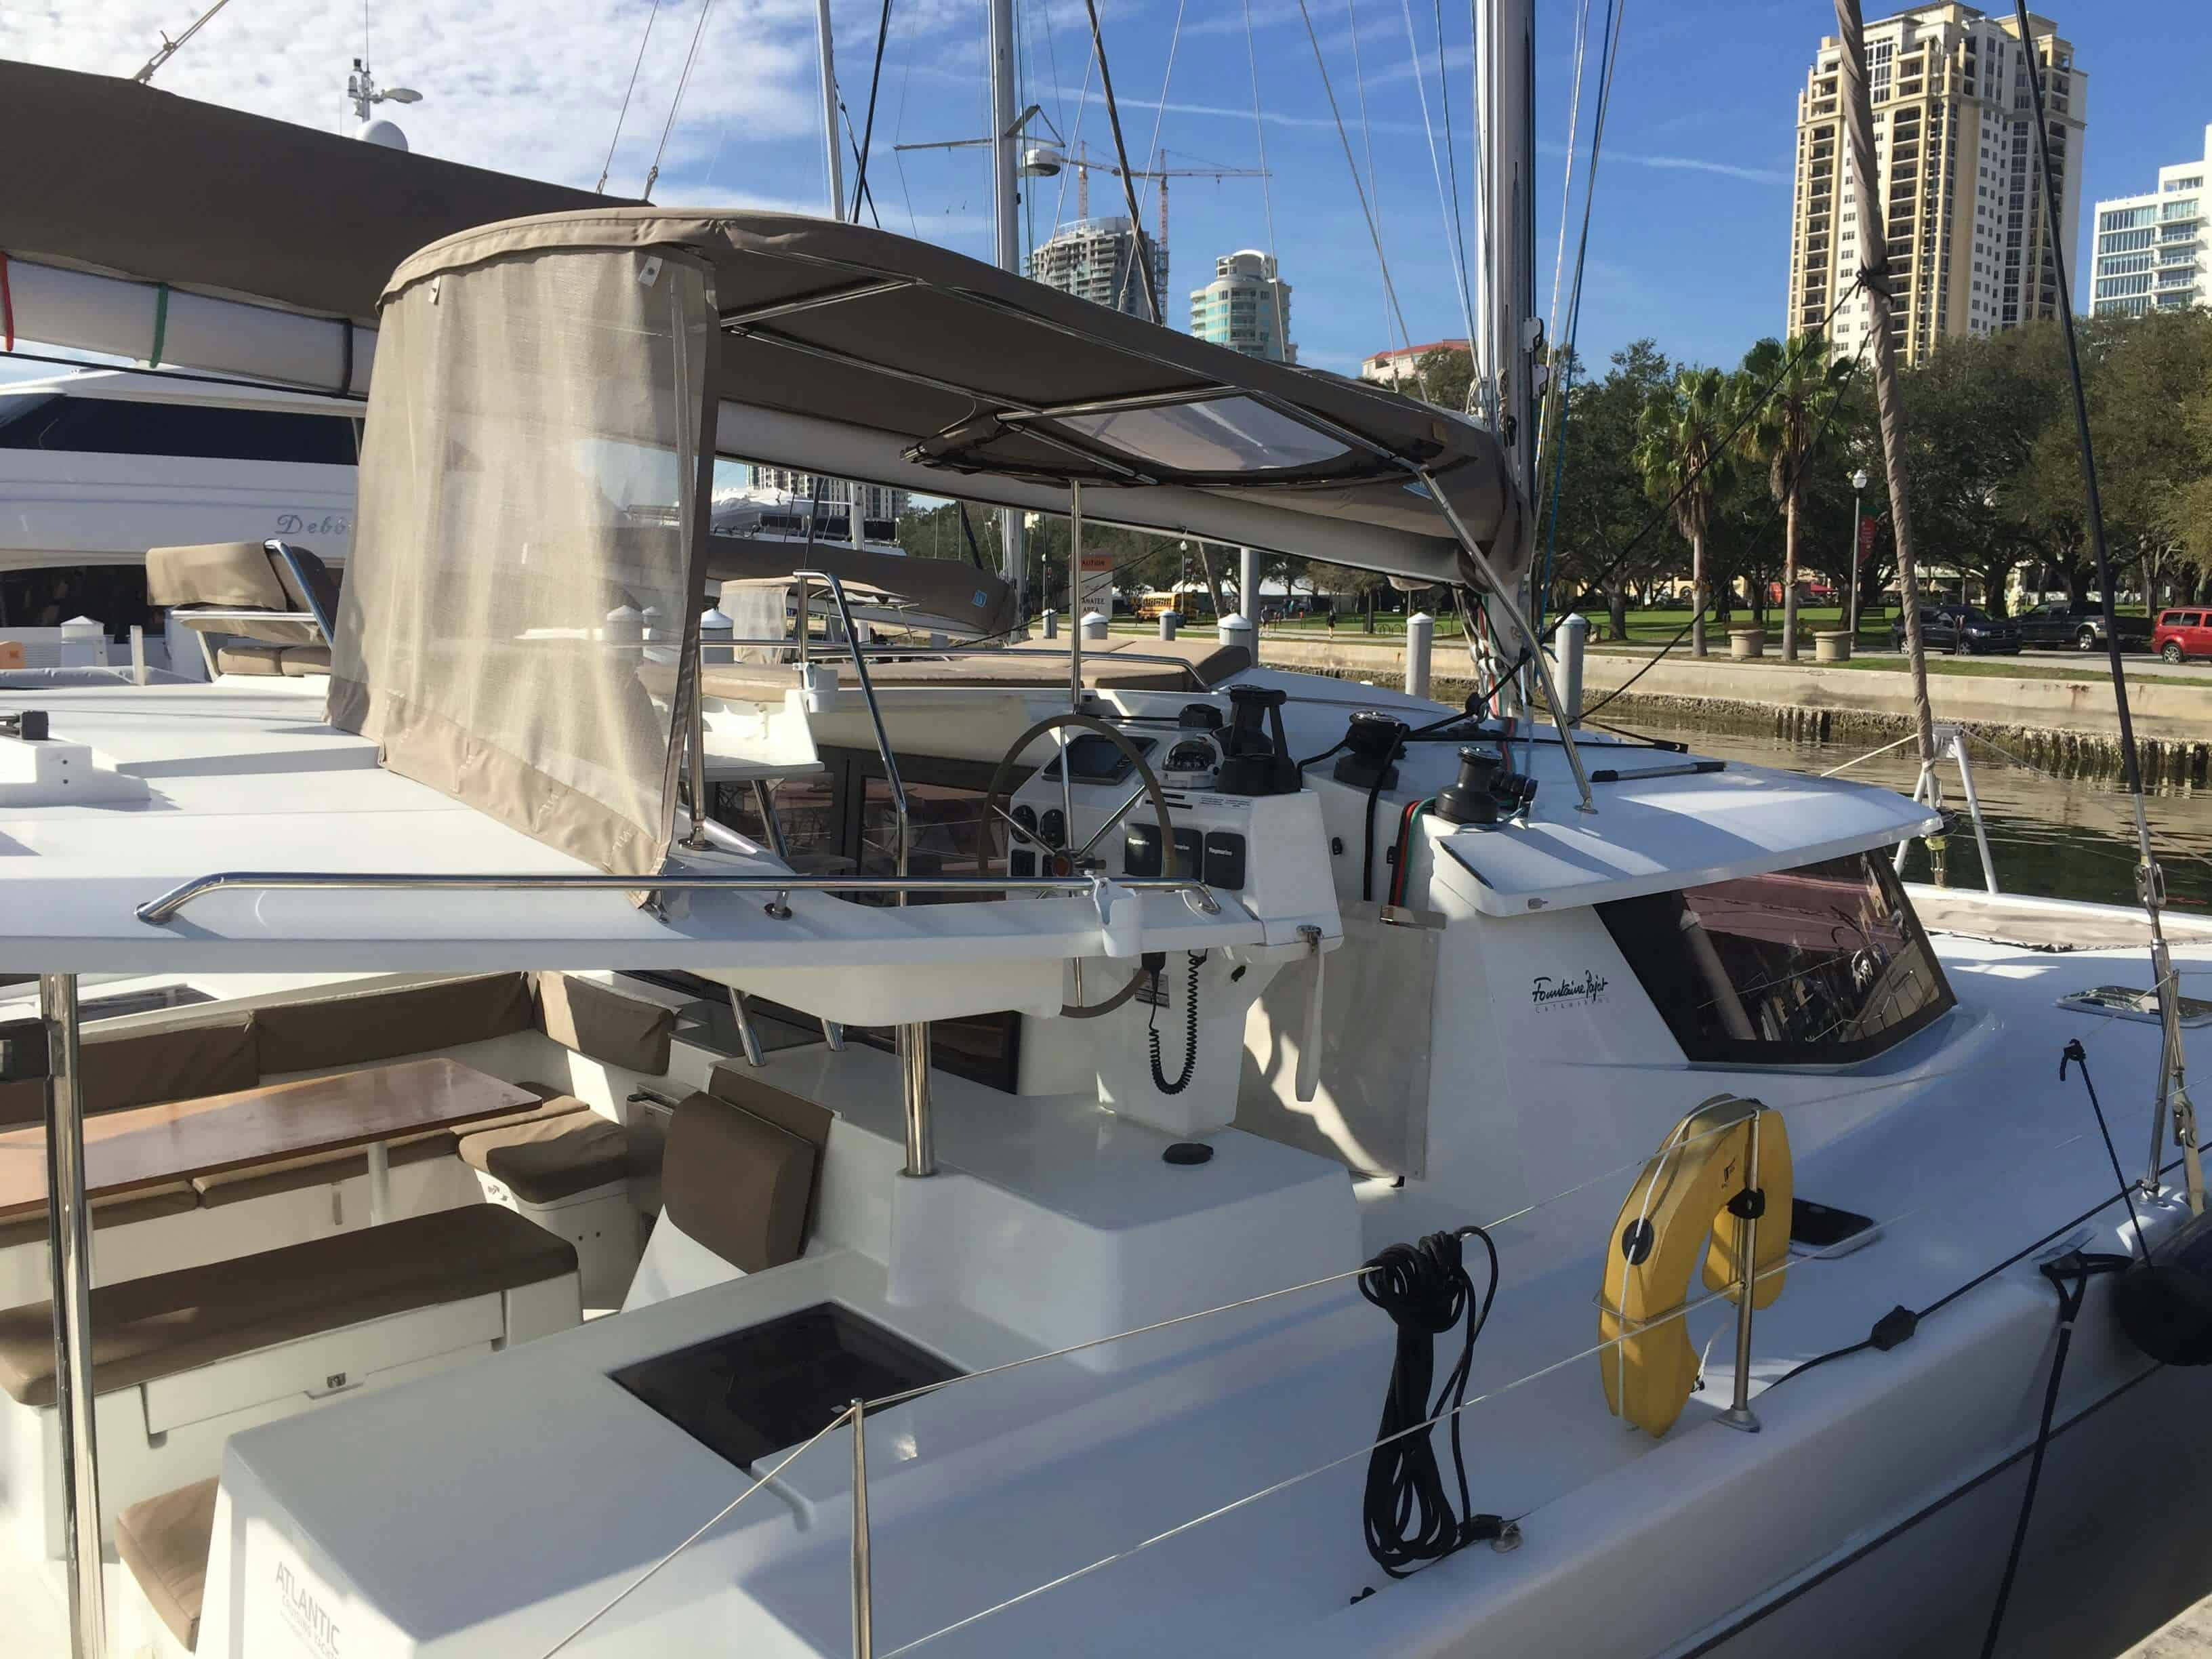 Book Lipari 41 - 3 cab. Catamaran for bareboat charter in St. Petersburg, Vinoy Marina, Florida, USA with TripYacht!, picture 1